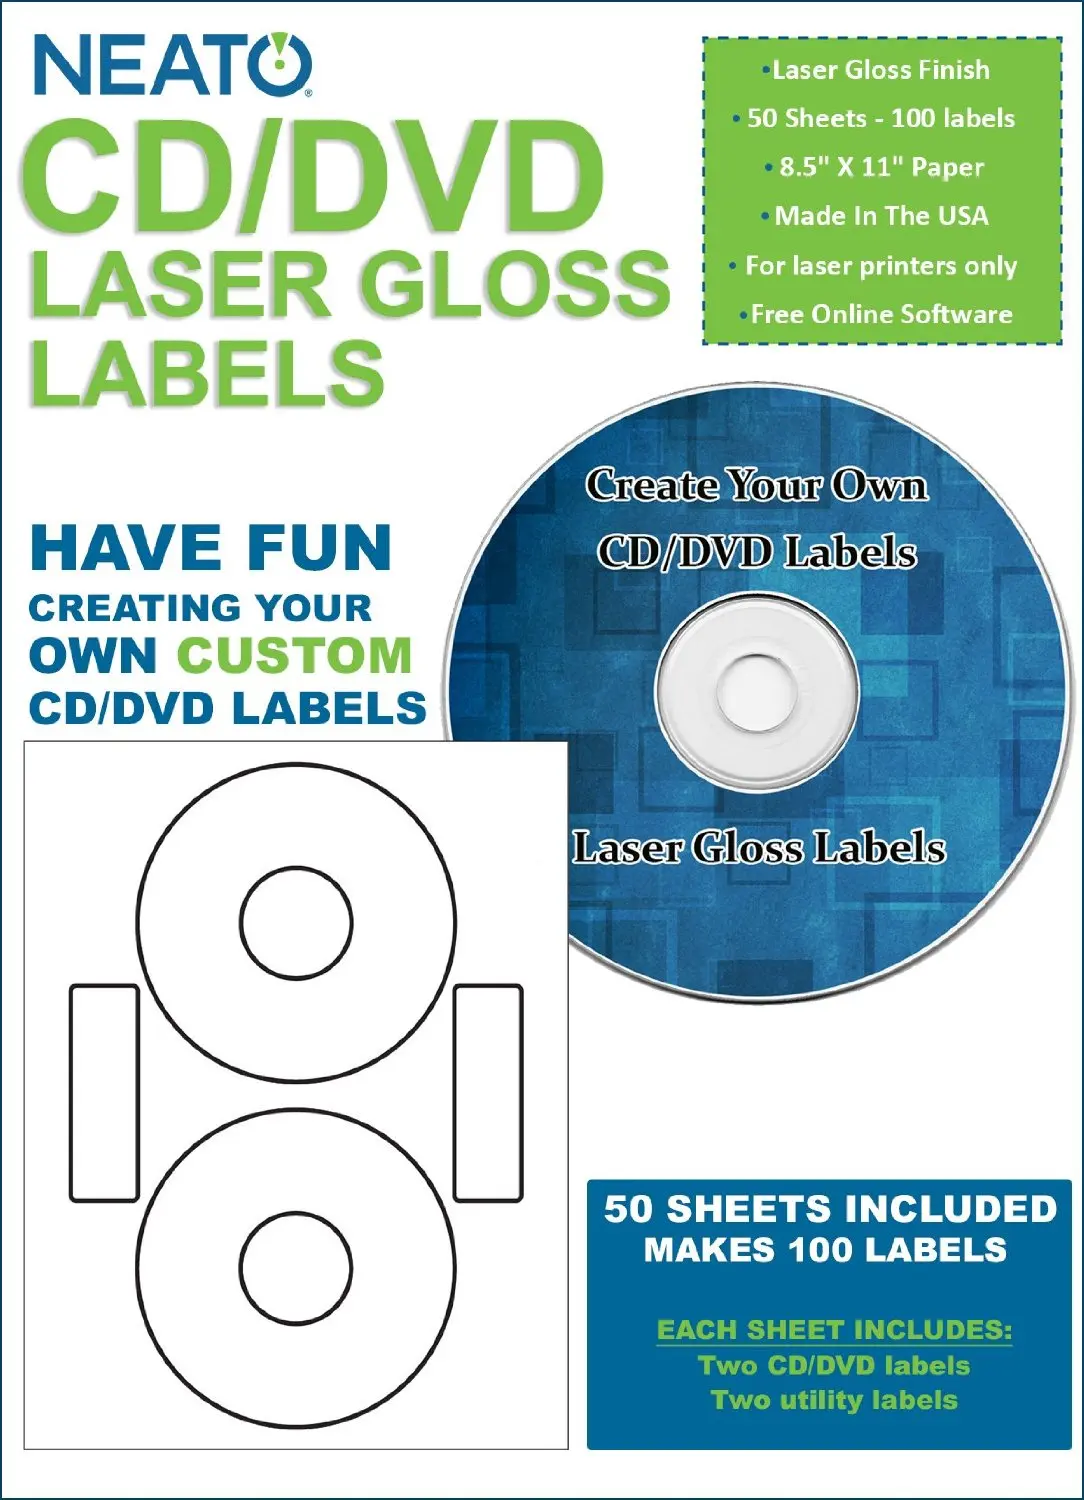 fellowes cd label software free download